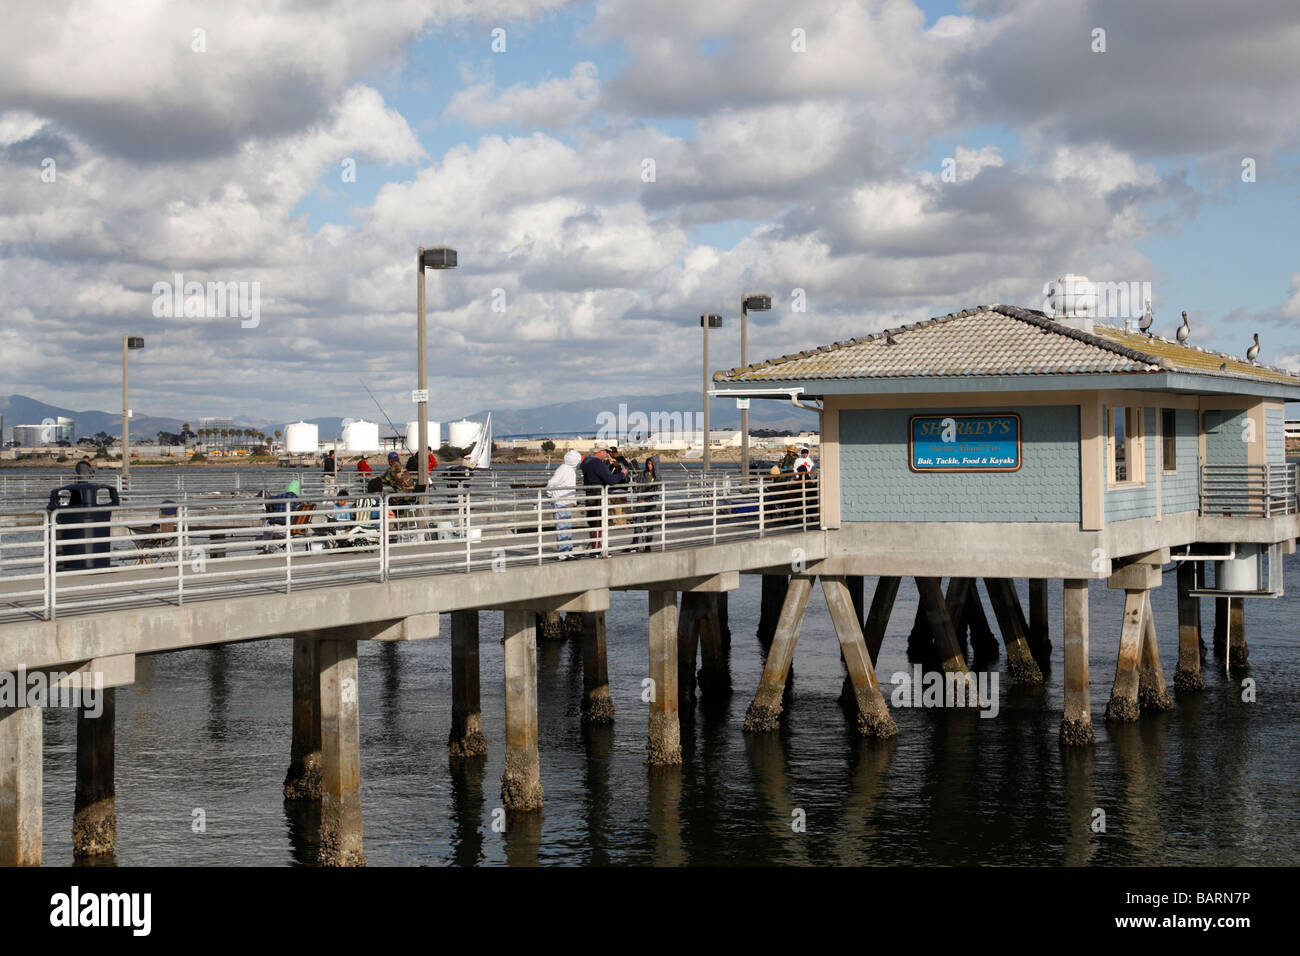 shelter island pier popular for fishing with sharkeys a bait and